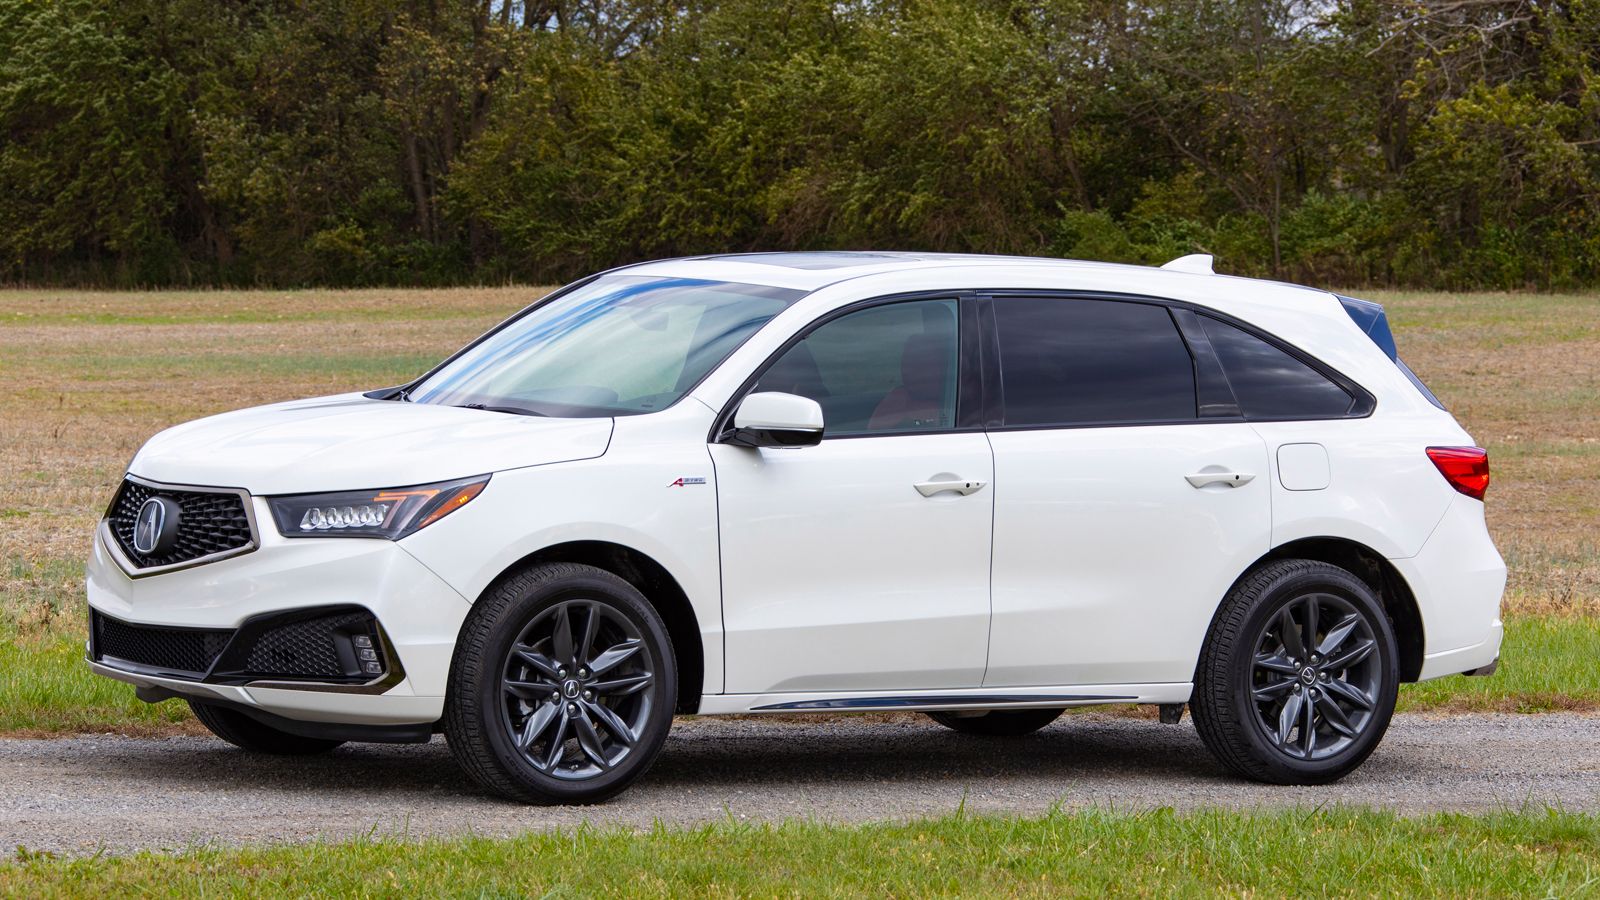 2020 Acura MDX A-Spec road test: Everything you need to know